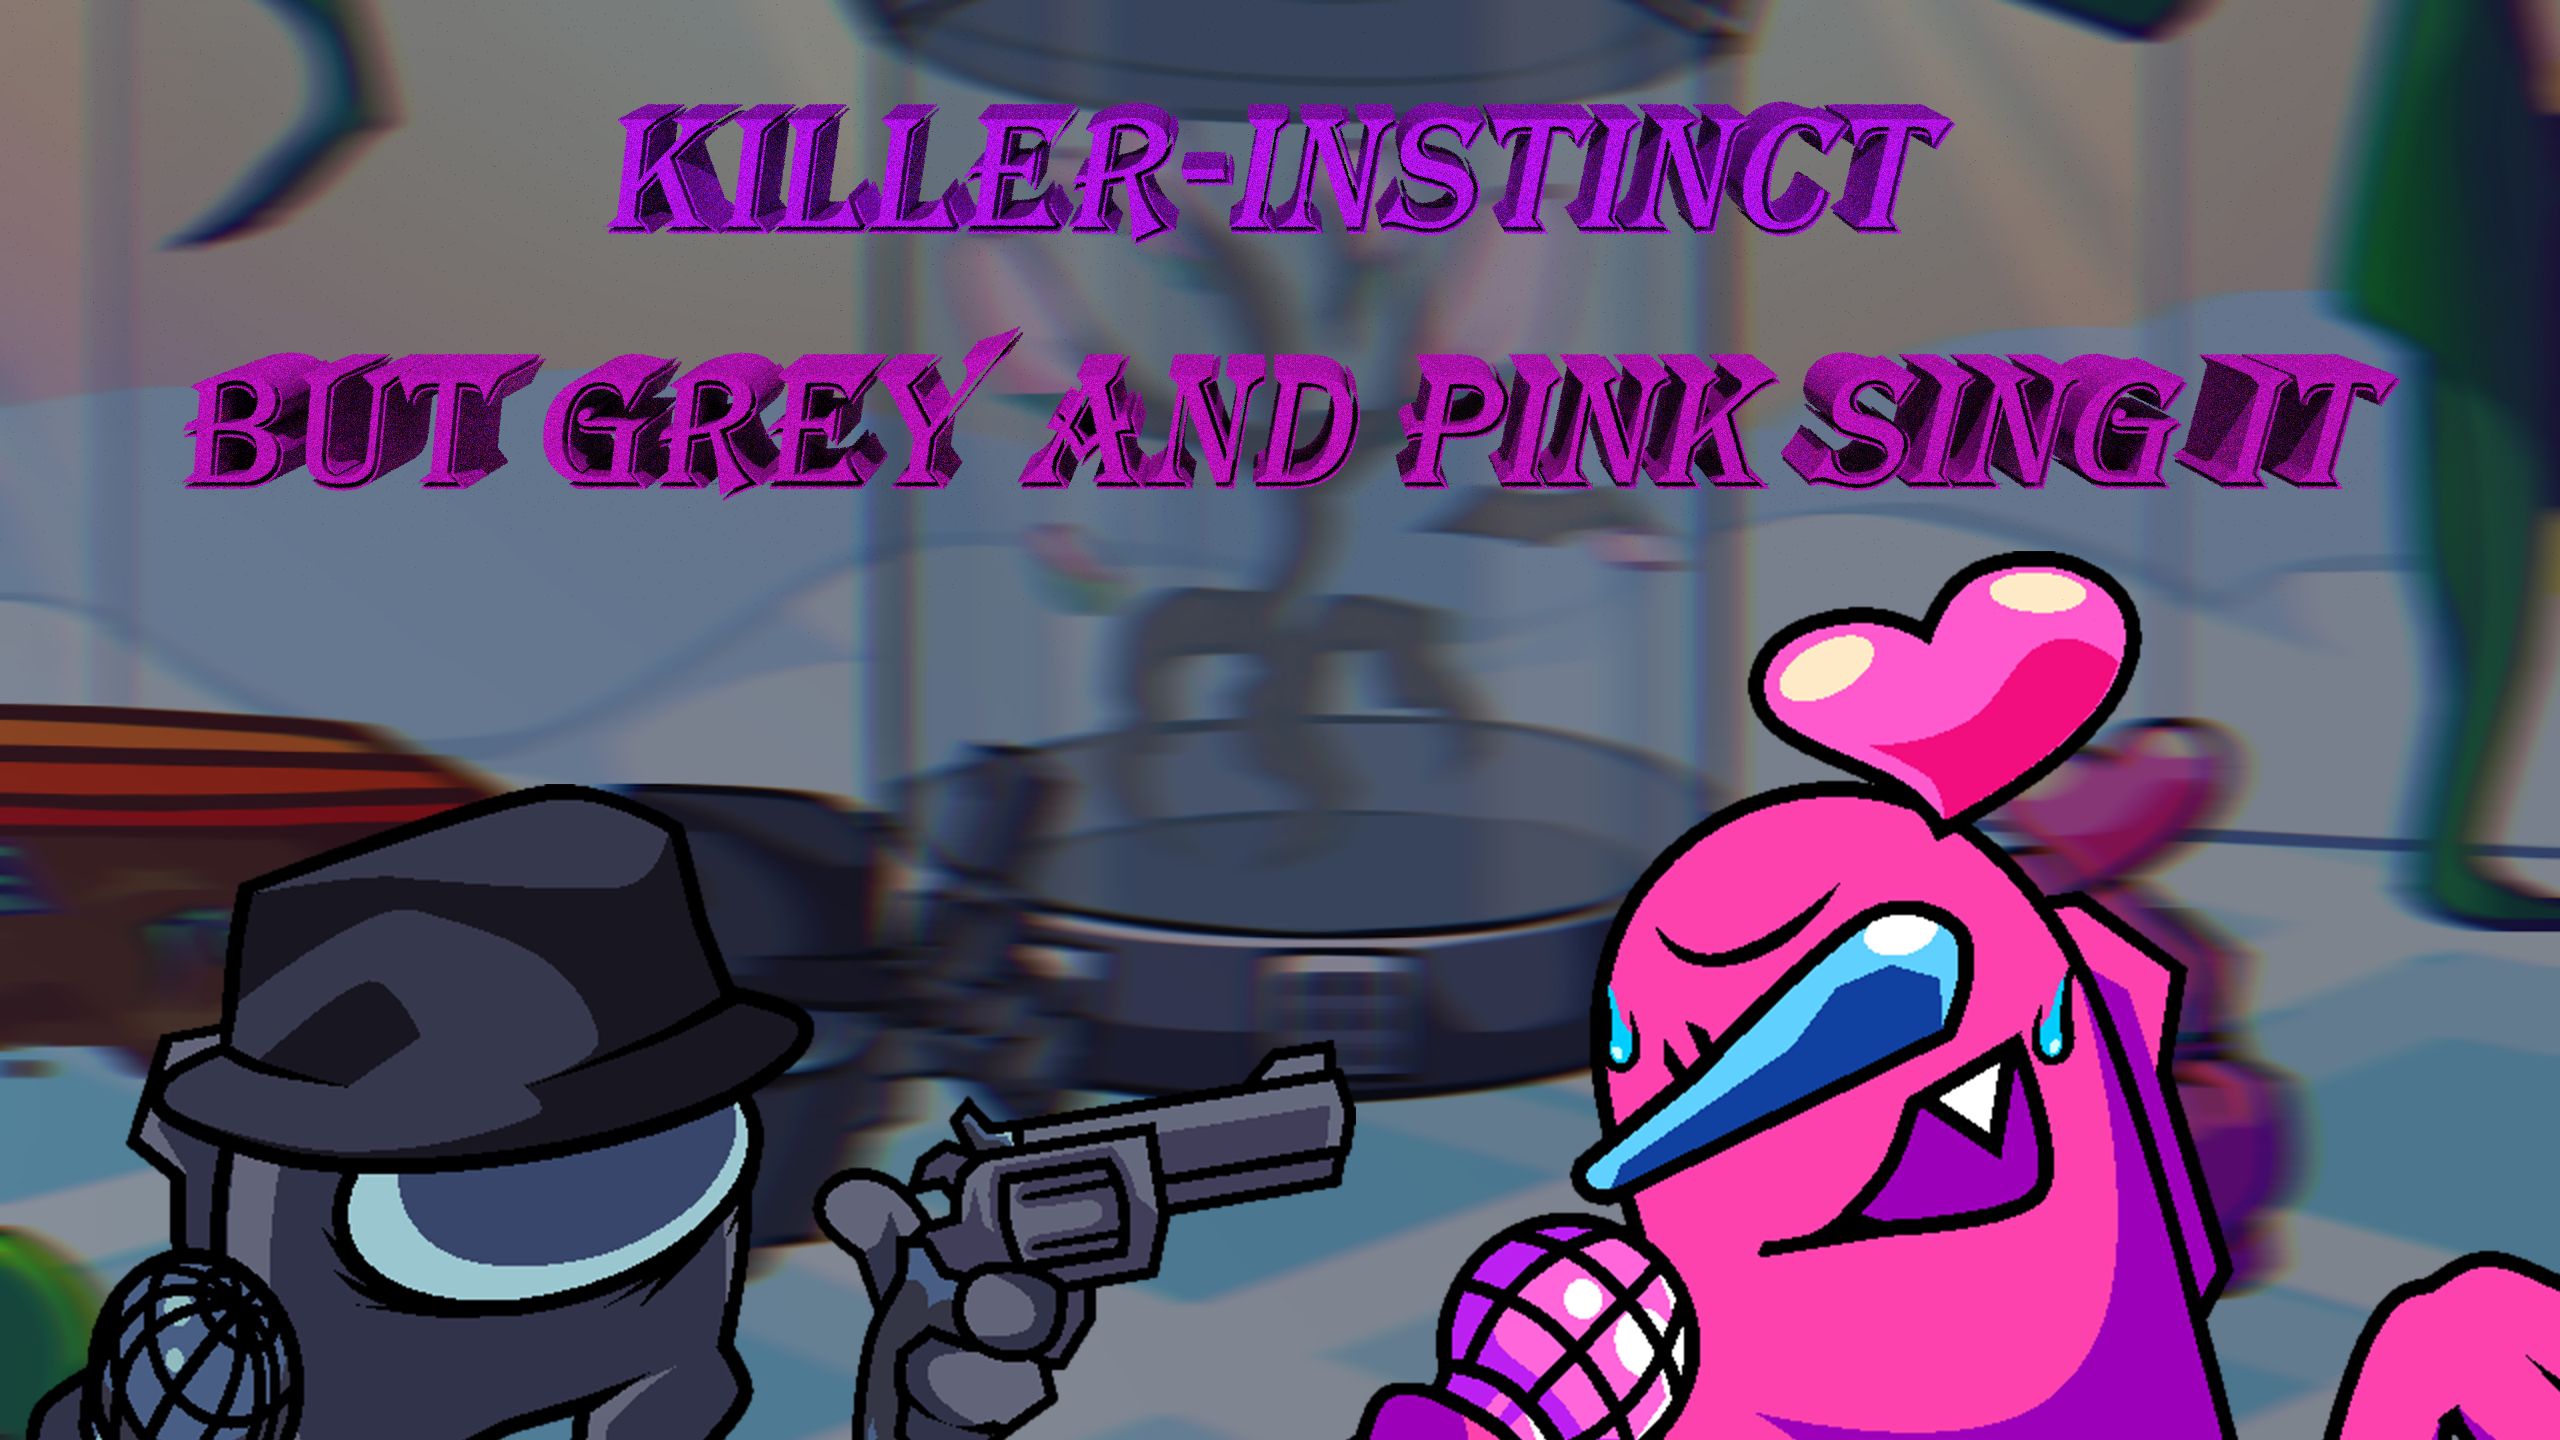 【Cover】killer-instinct but grey and pink sing it